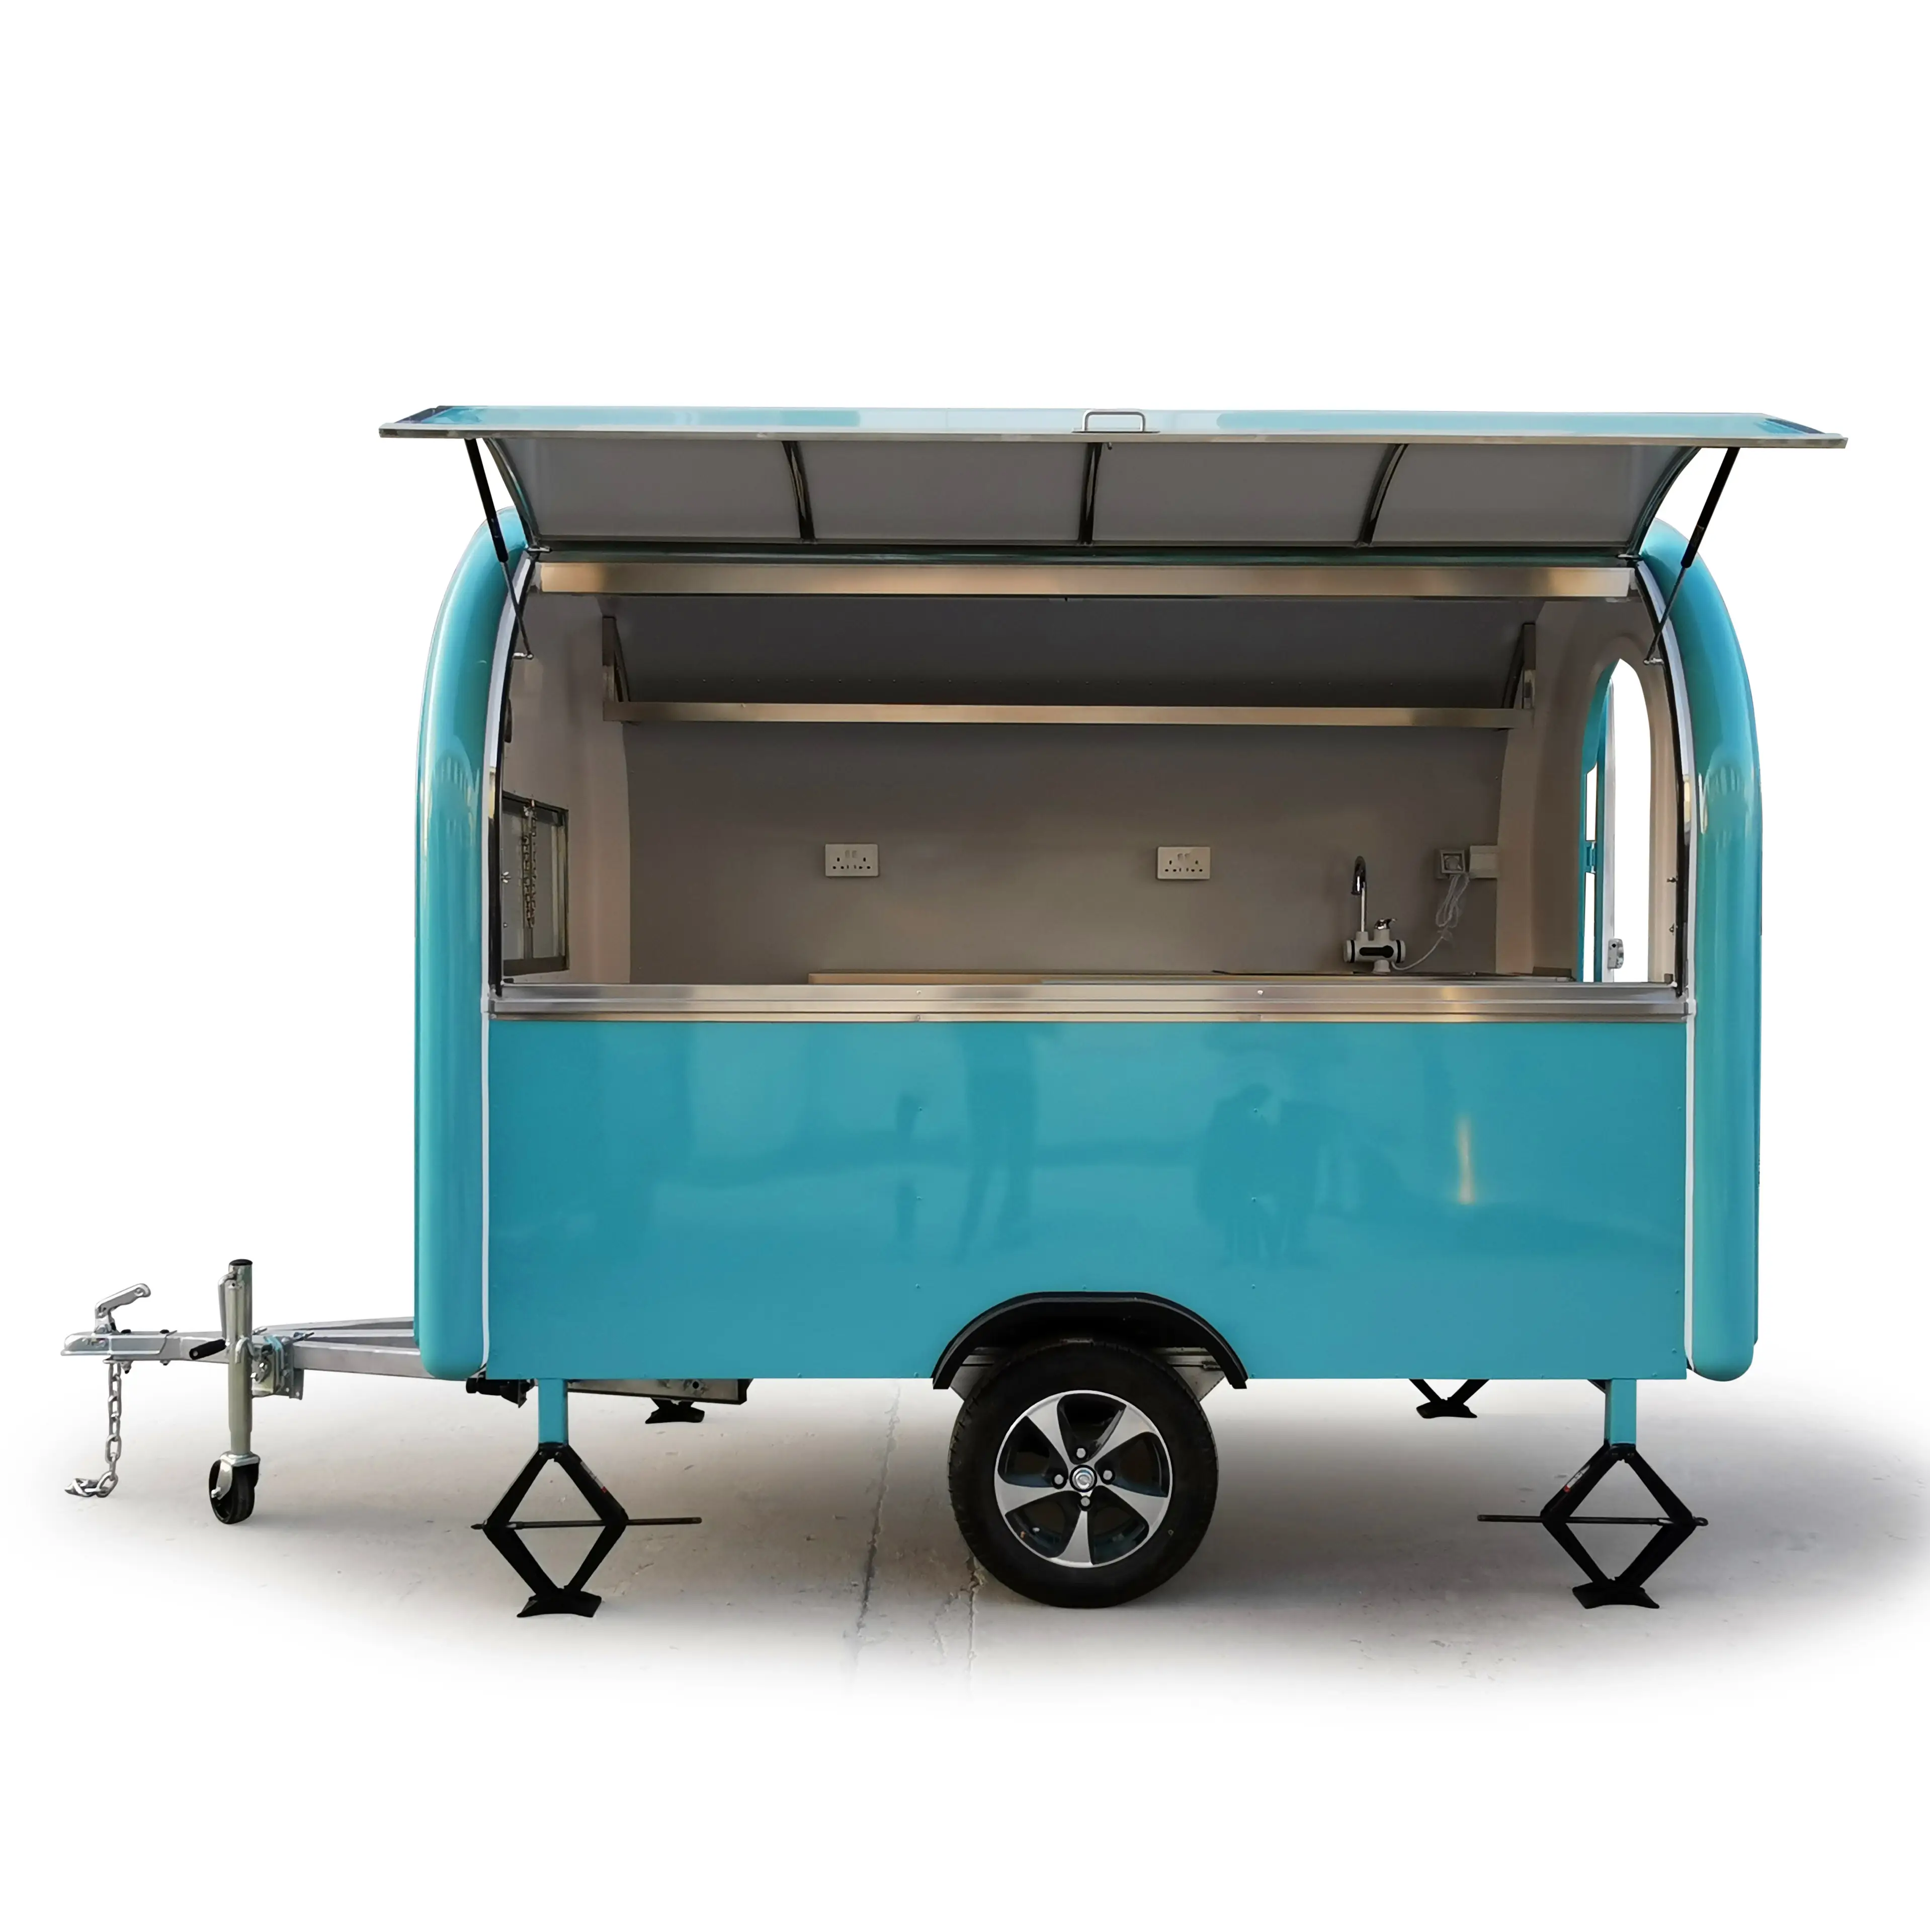 China Supplier Colorful street mobile food cart /shanghai silang high quality fast food truck / hot sale food trailer